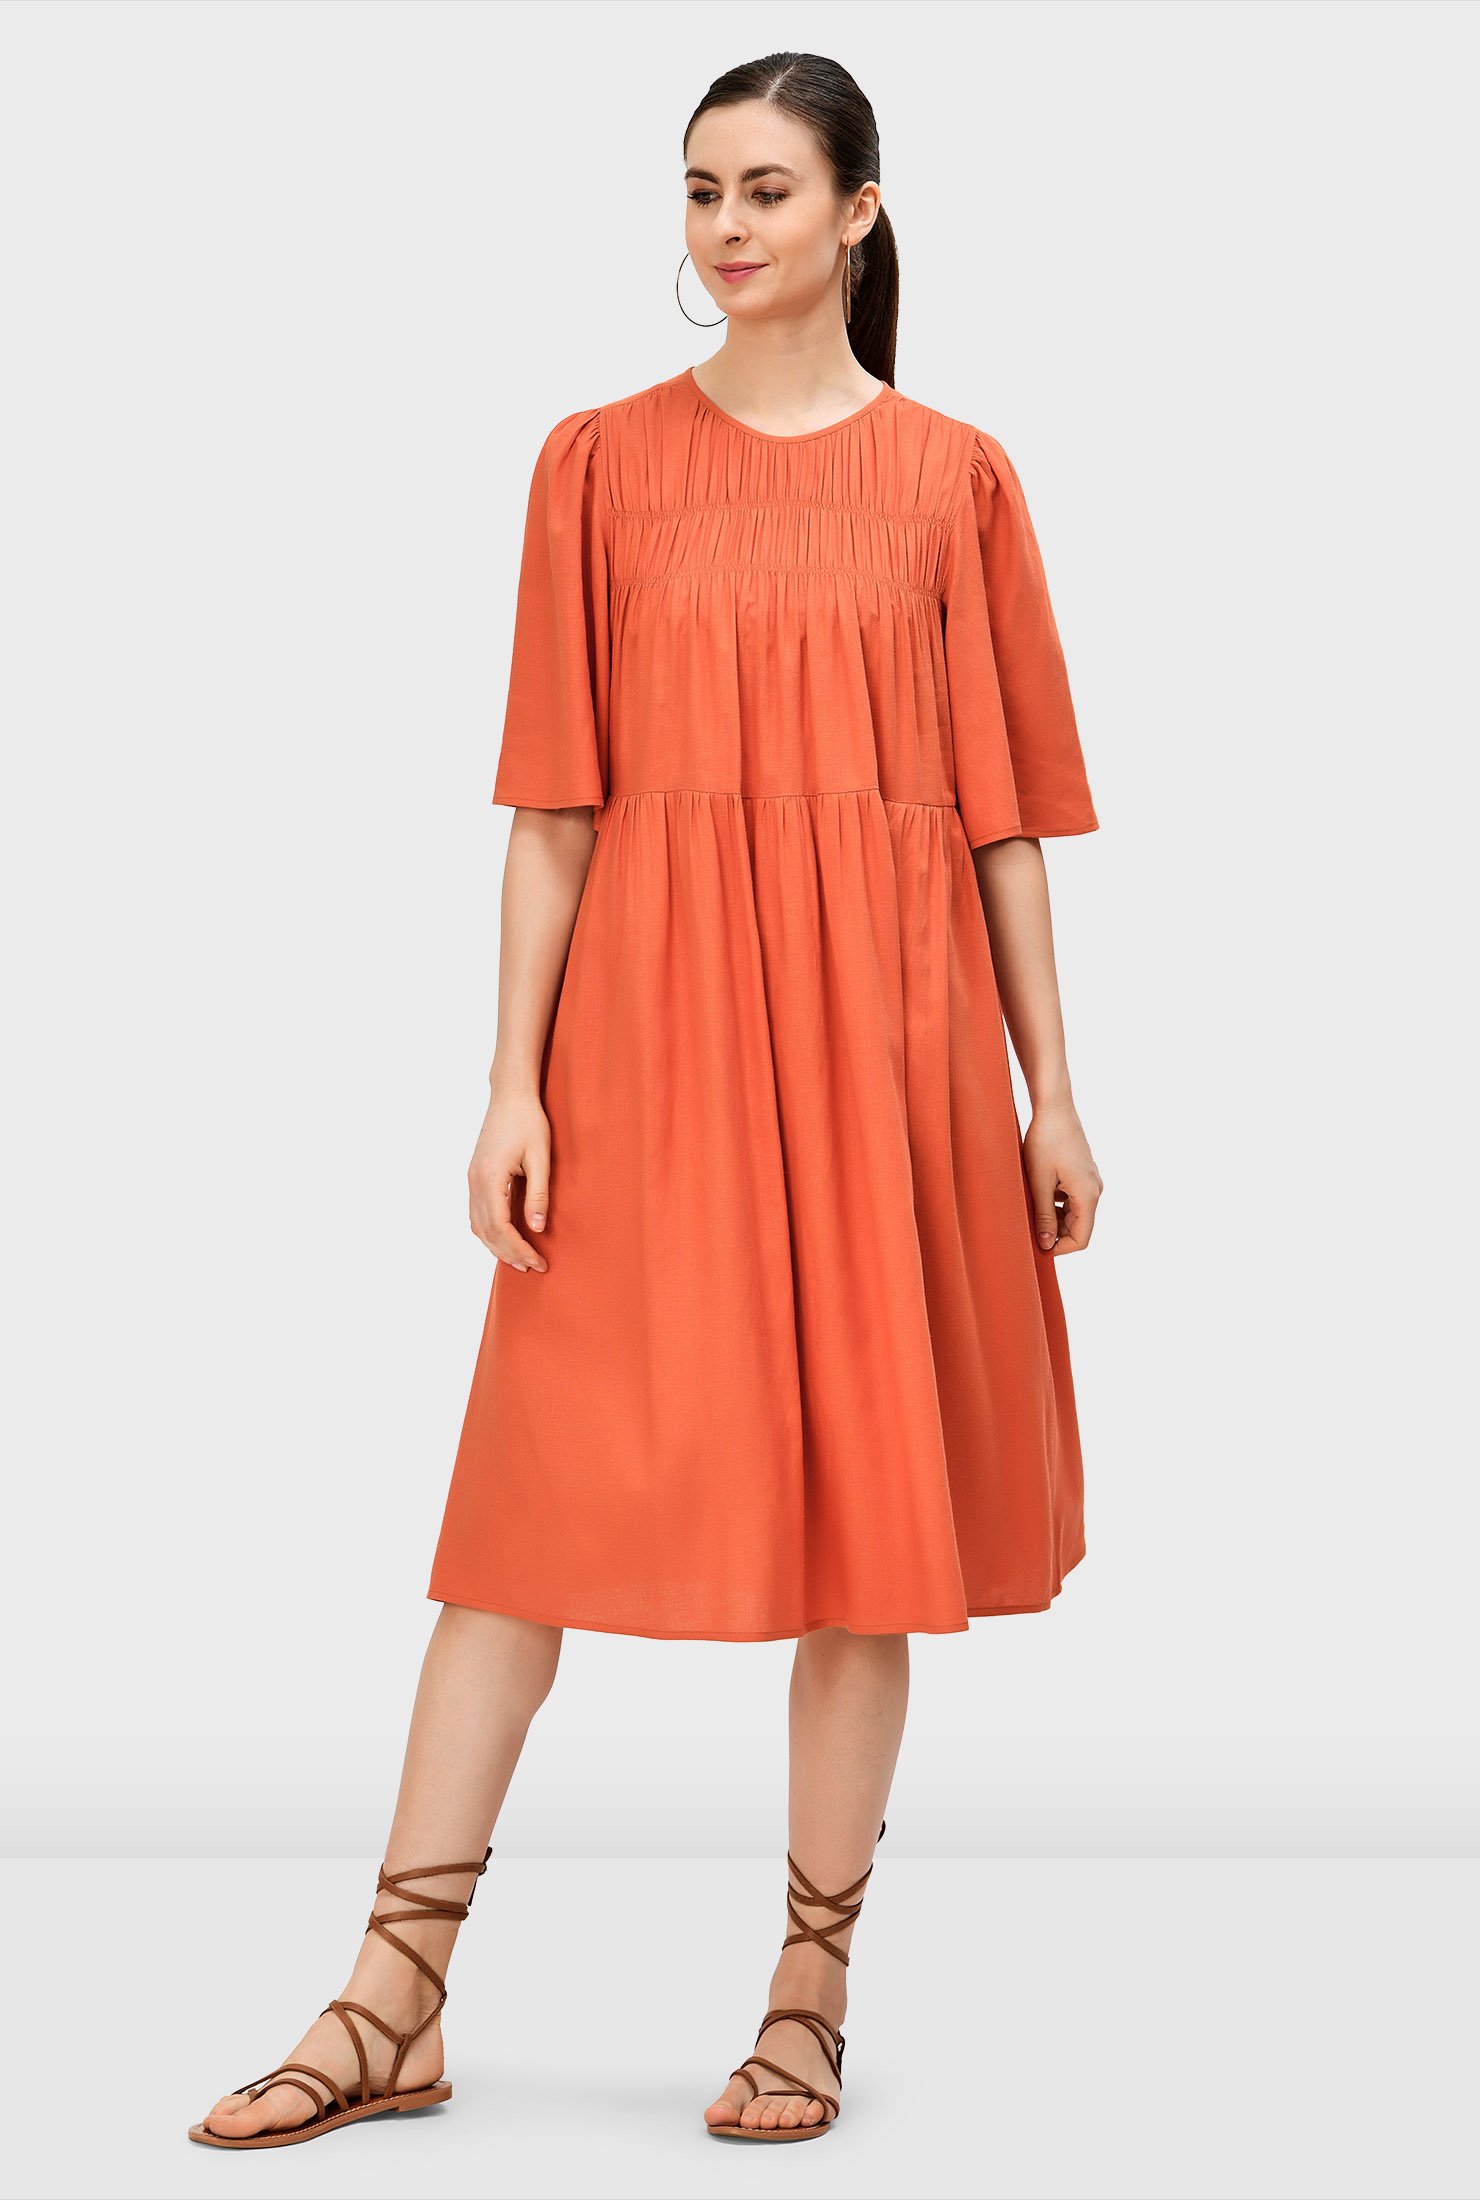 Summertime, and the linen's easy! Our flared swing style linen modal shift dress is shirred at the elasticated front yoke and at the full skirt, a definition of effortless style.